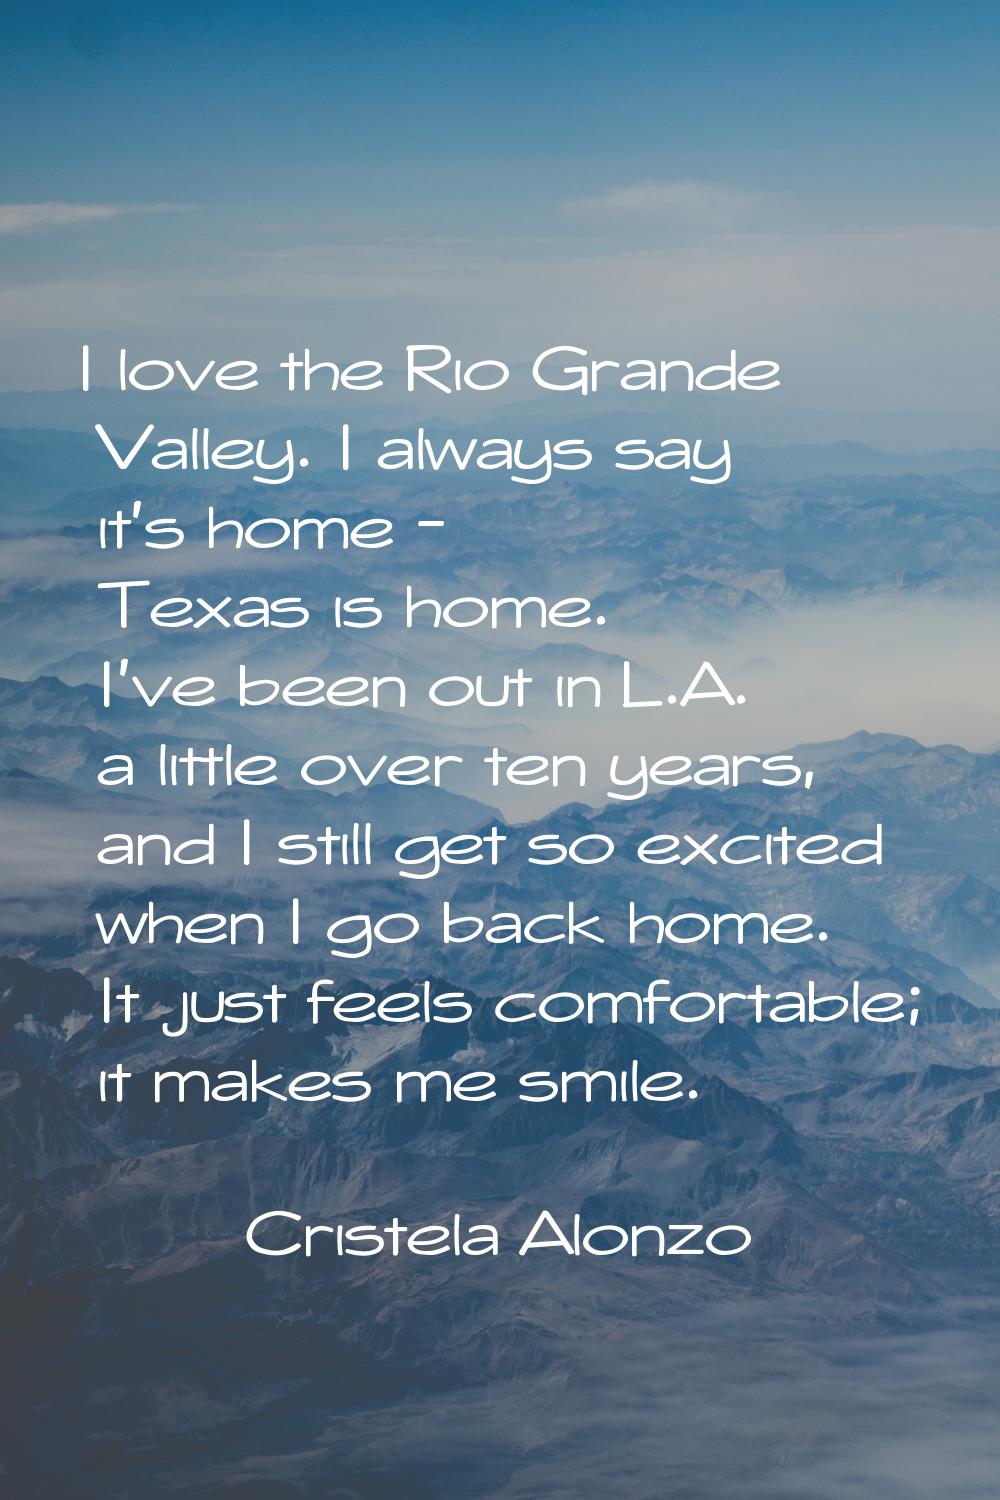 I love the Rio Grande Valley. I always say it's home - Texas is home. I've been out in L.A. a littl